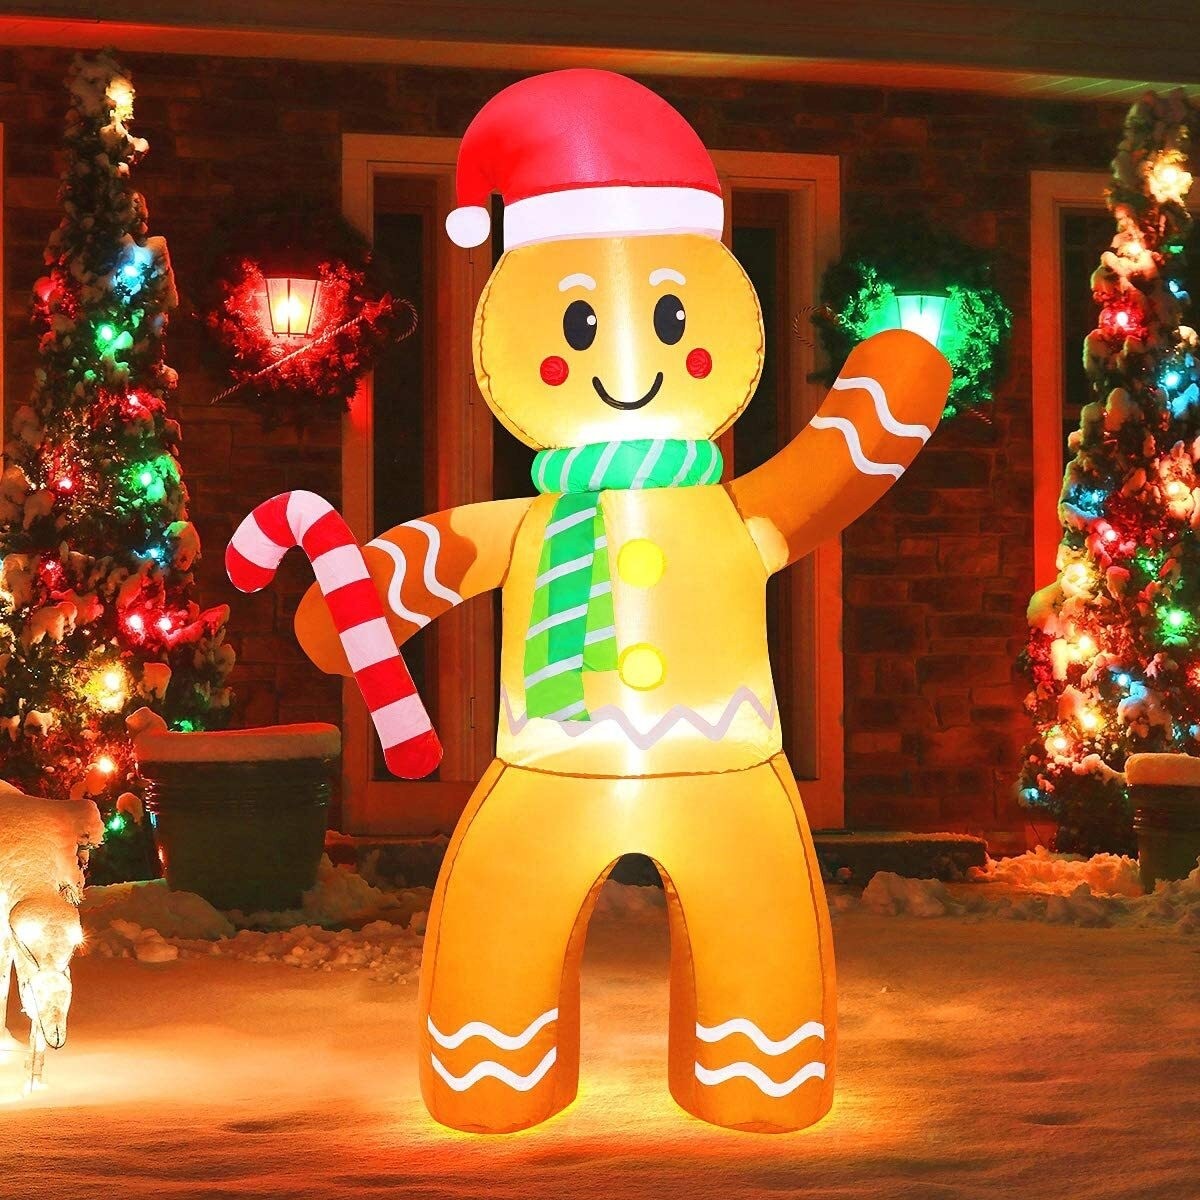 10 Joyful Christmas Inflatables You Can’t Miss - Foter